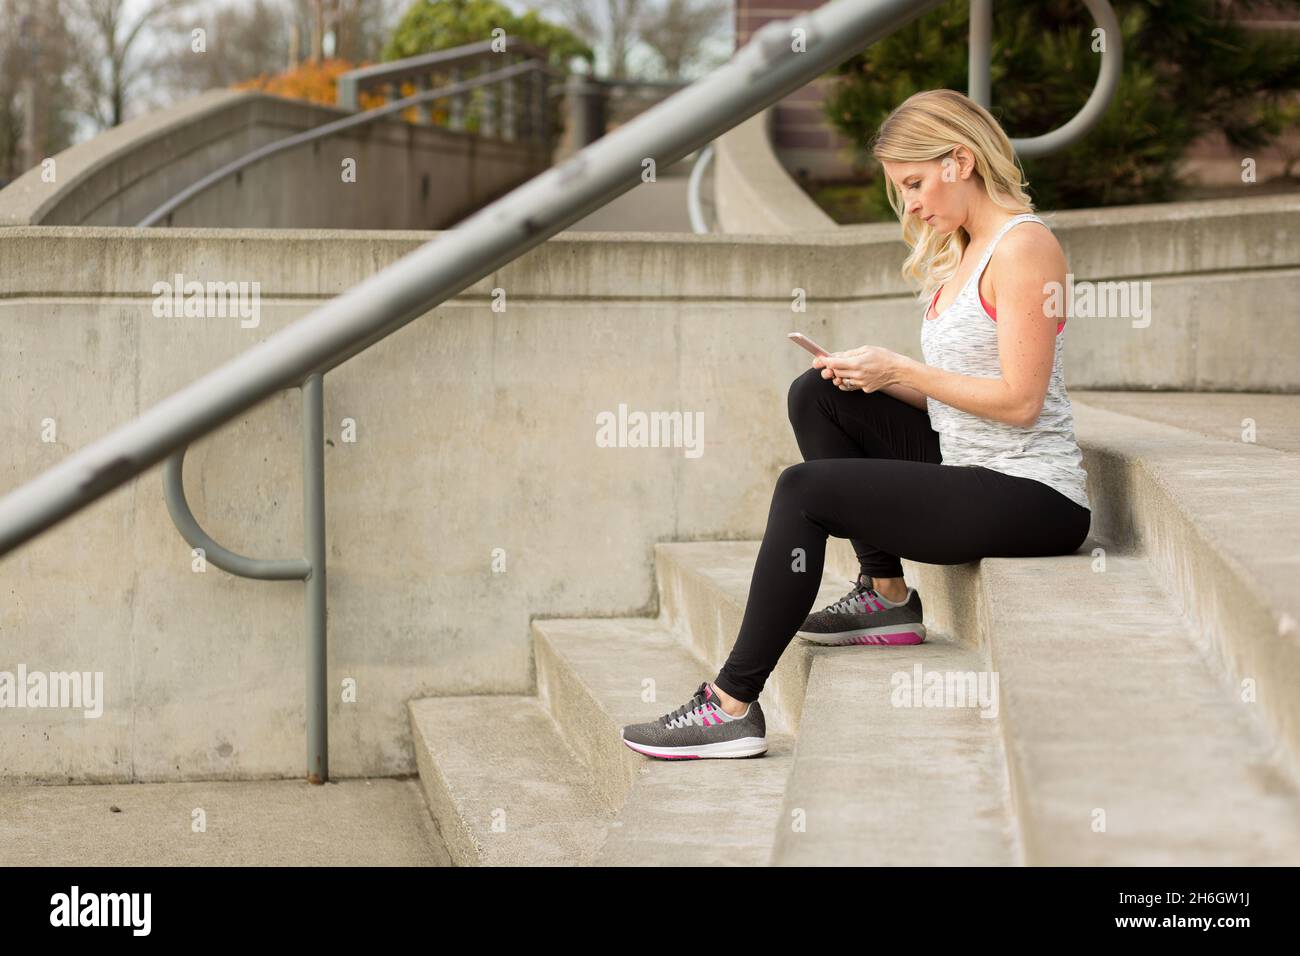 Attrractive woman in workout gear texting Stock Photo